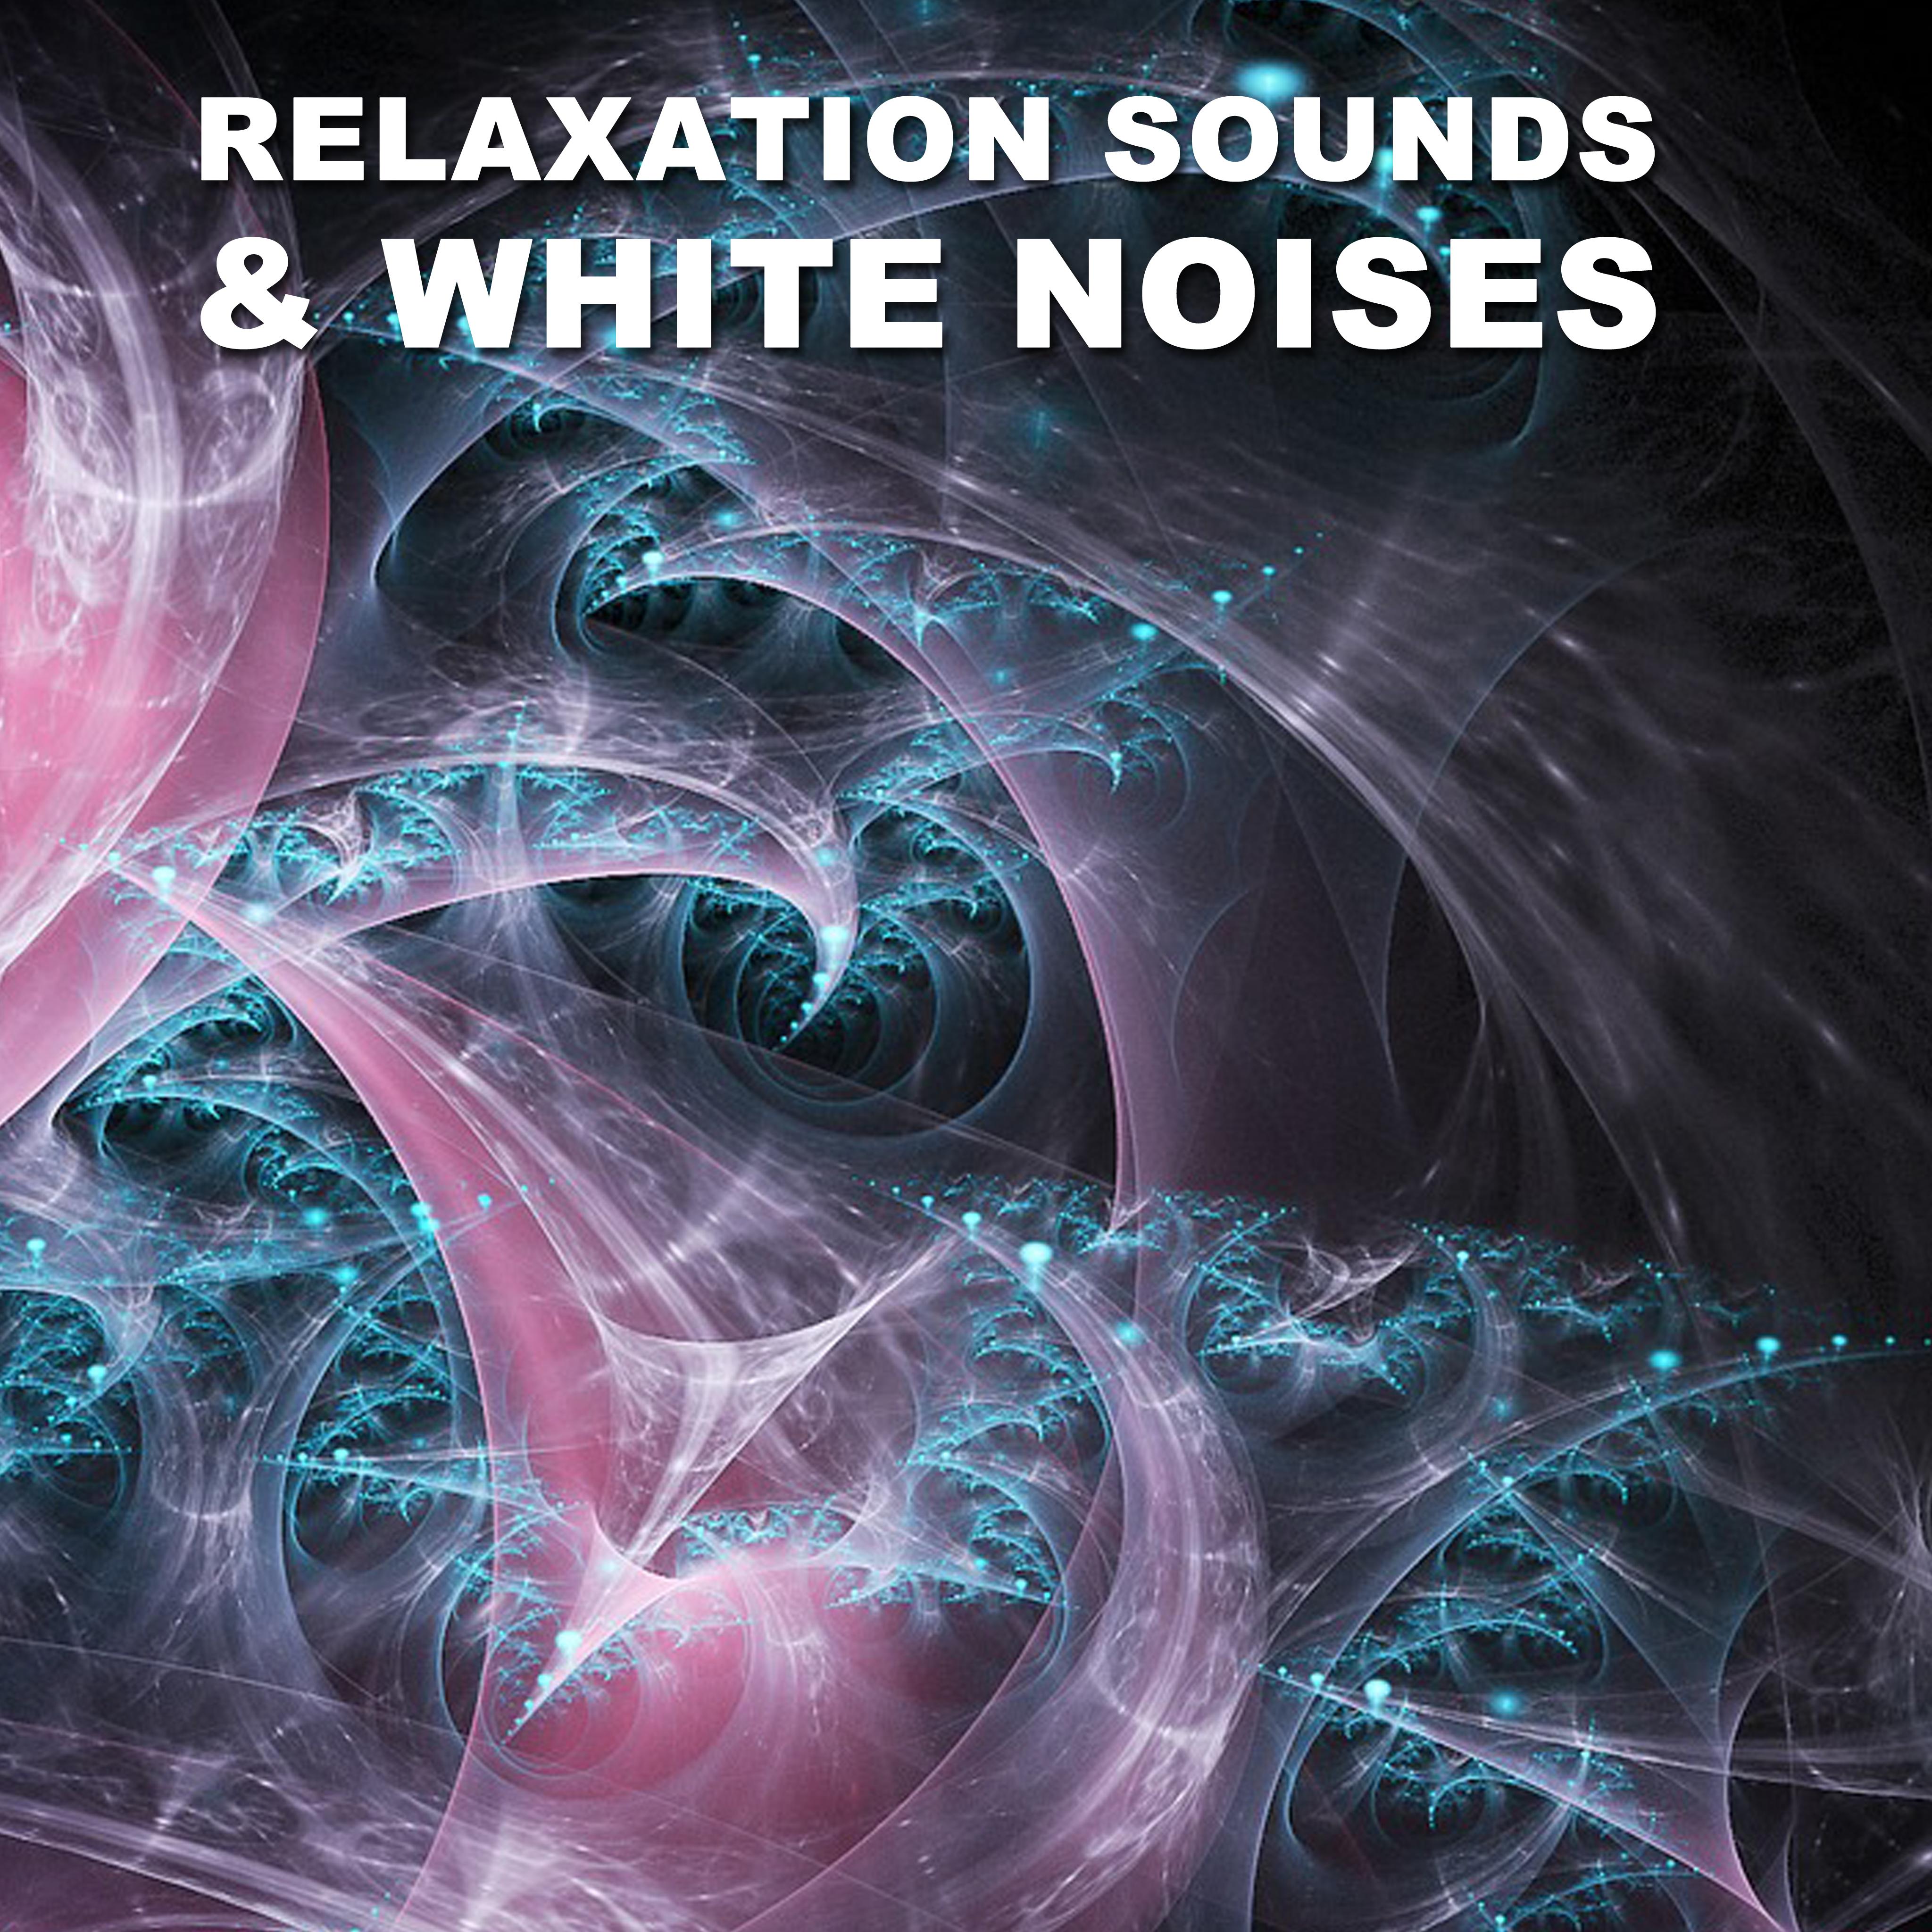 17 Relaxation Sounds & White Noises